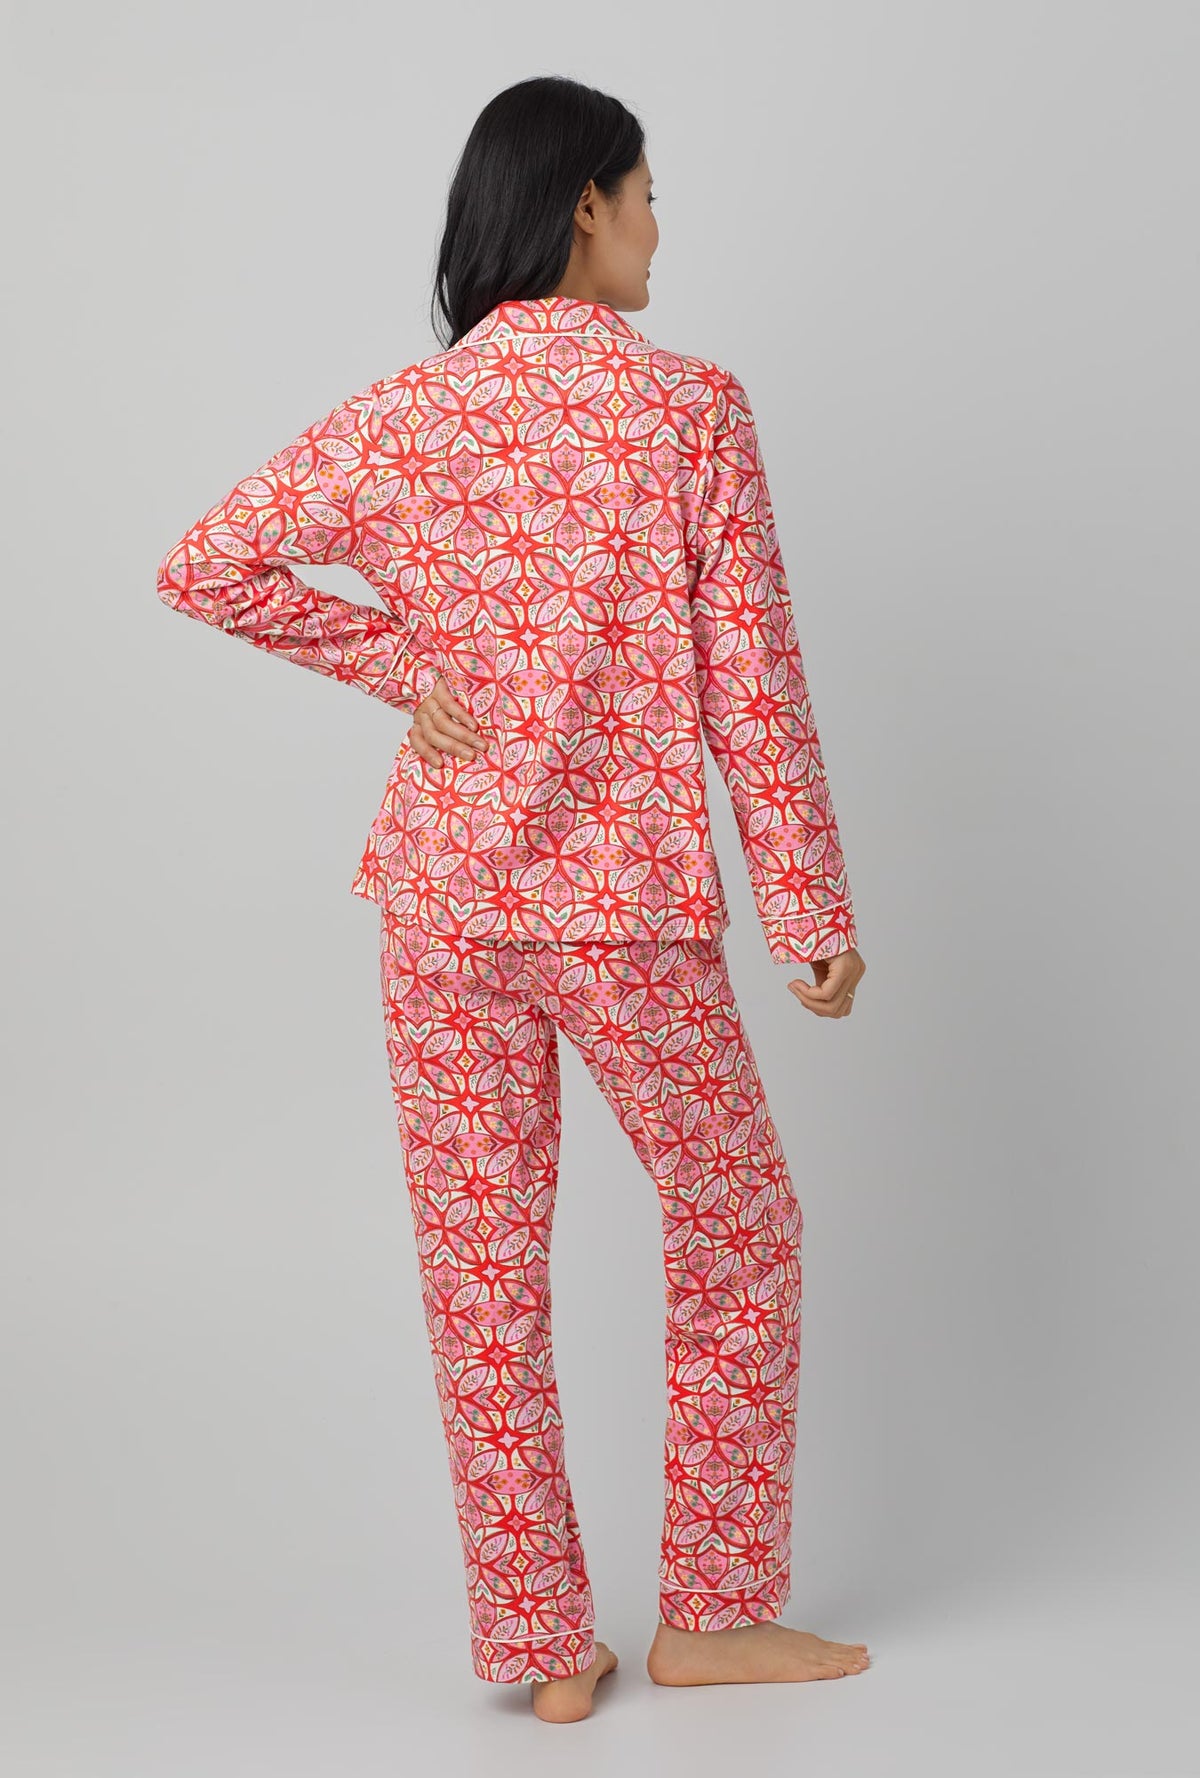 A lady wearing red Long Sleeve Classic Stretch Jersey PJ Set with Prairie Dawn print